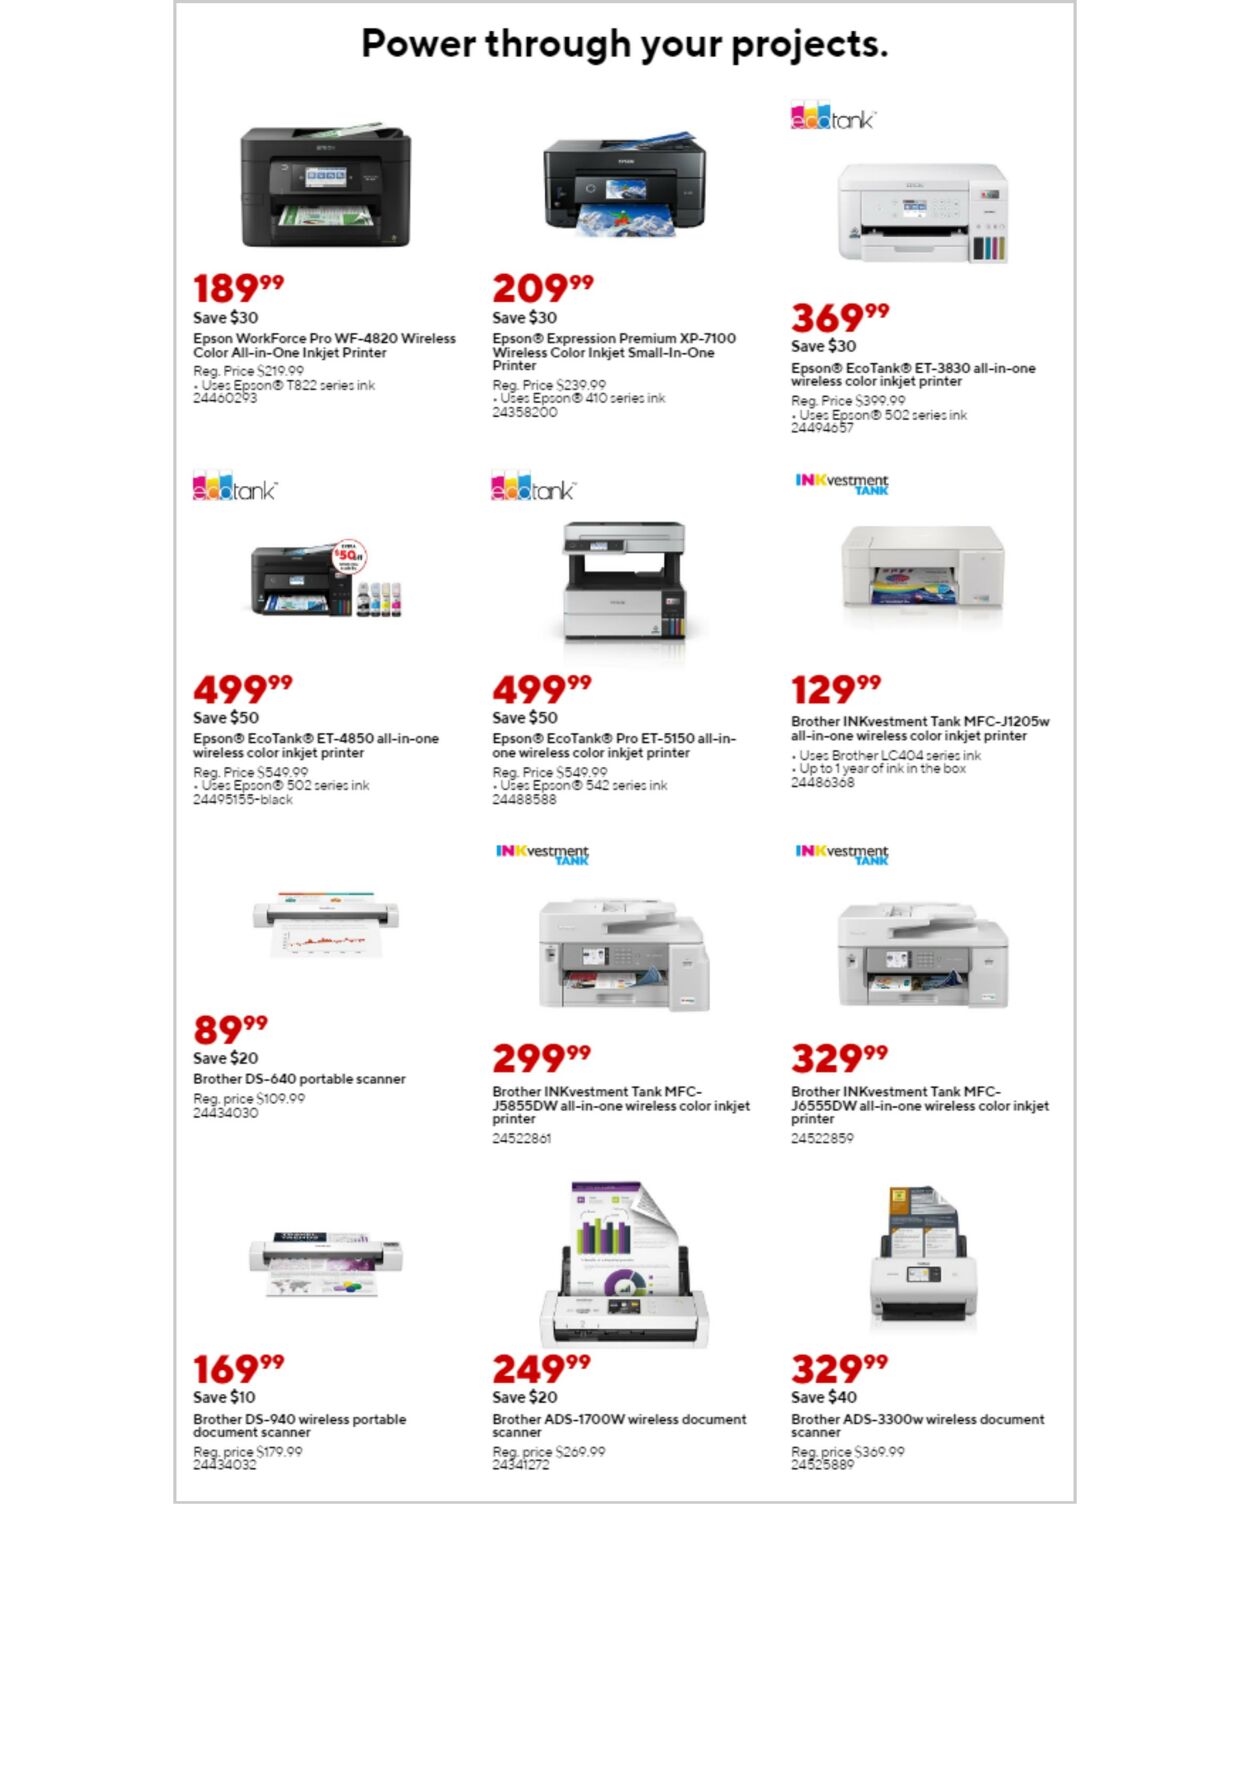 Weekly ad Staples 08/21/2022 - 08/27/2022